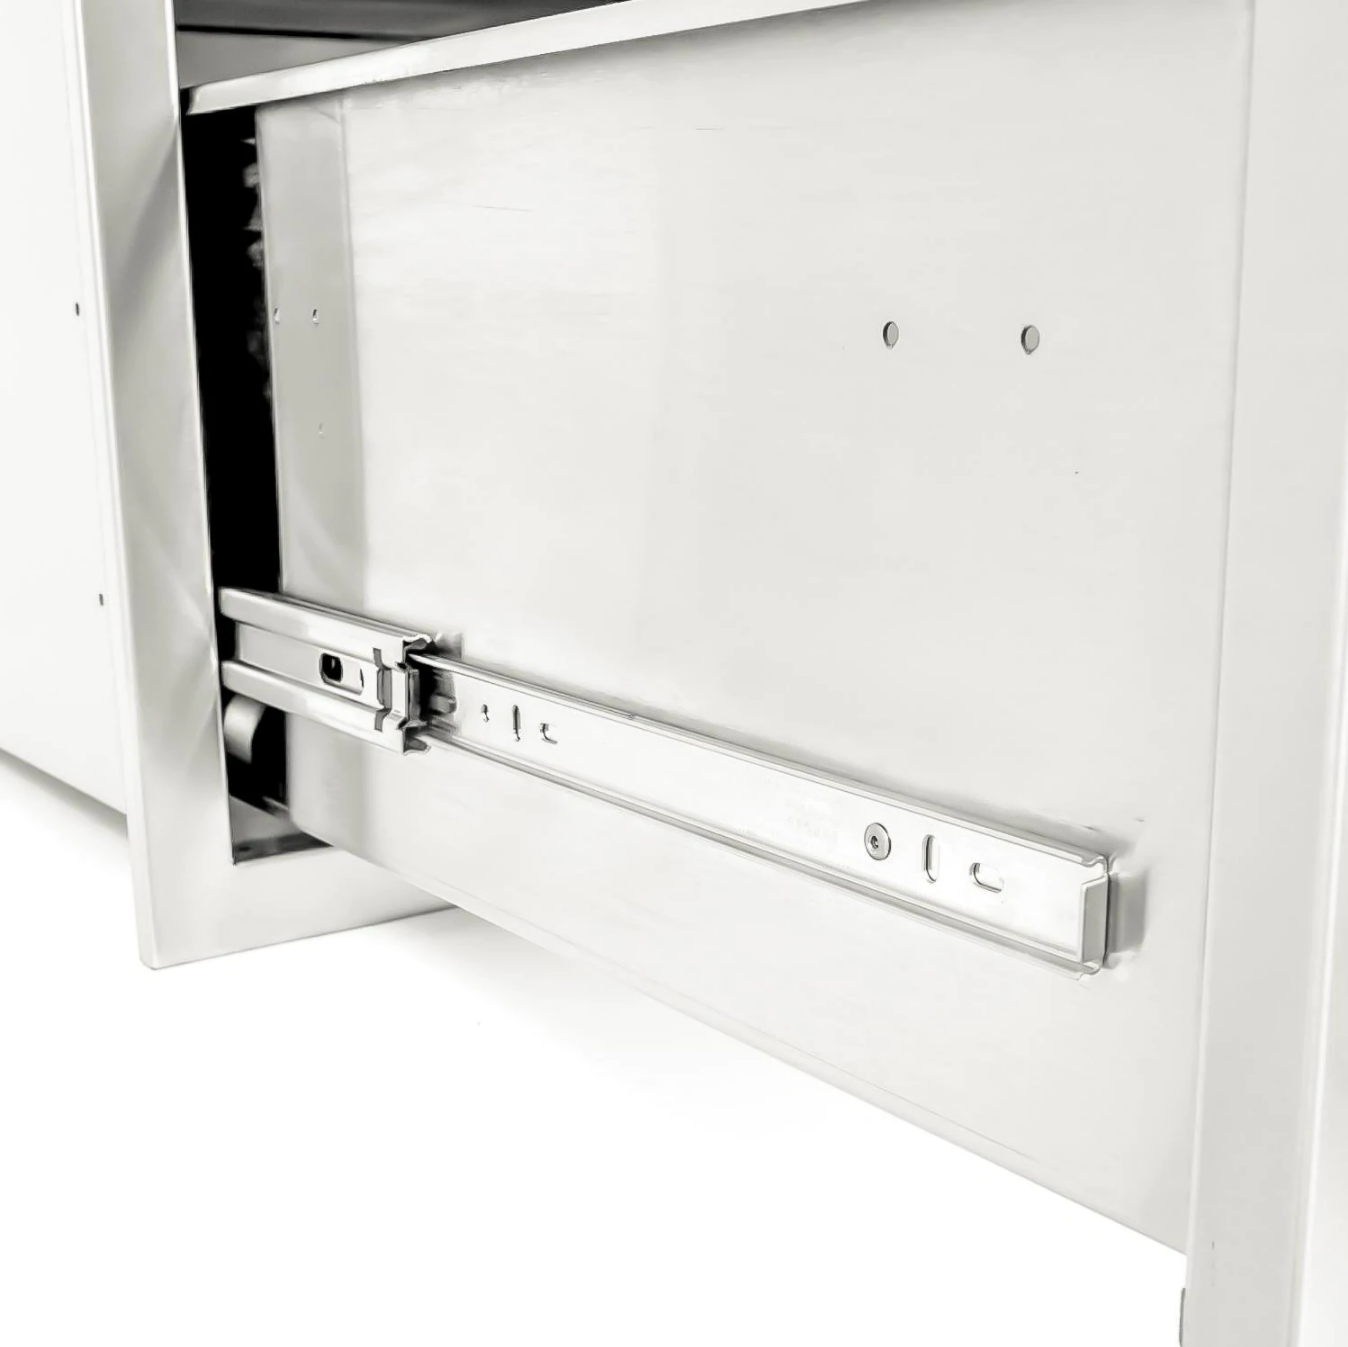 PCM 260 Series 30" x 15" Stainless Steel Single Access Drawer